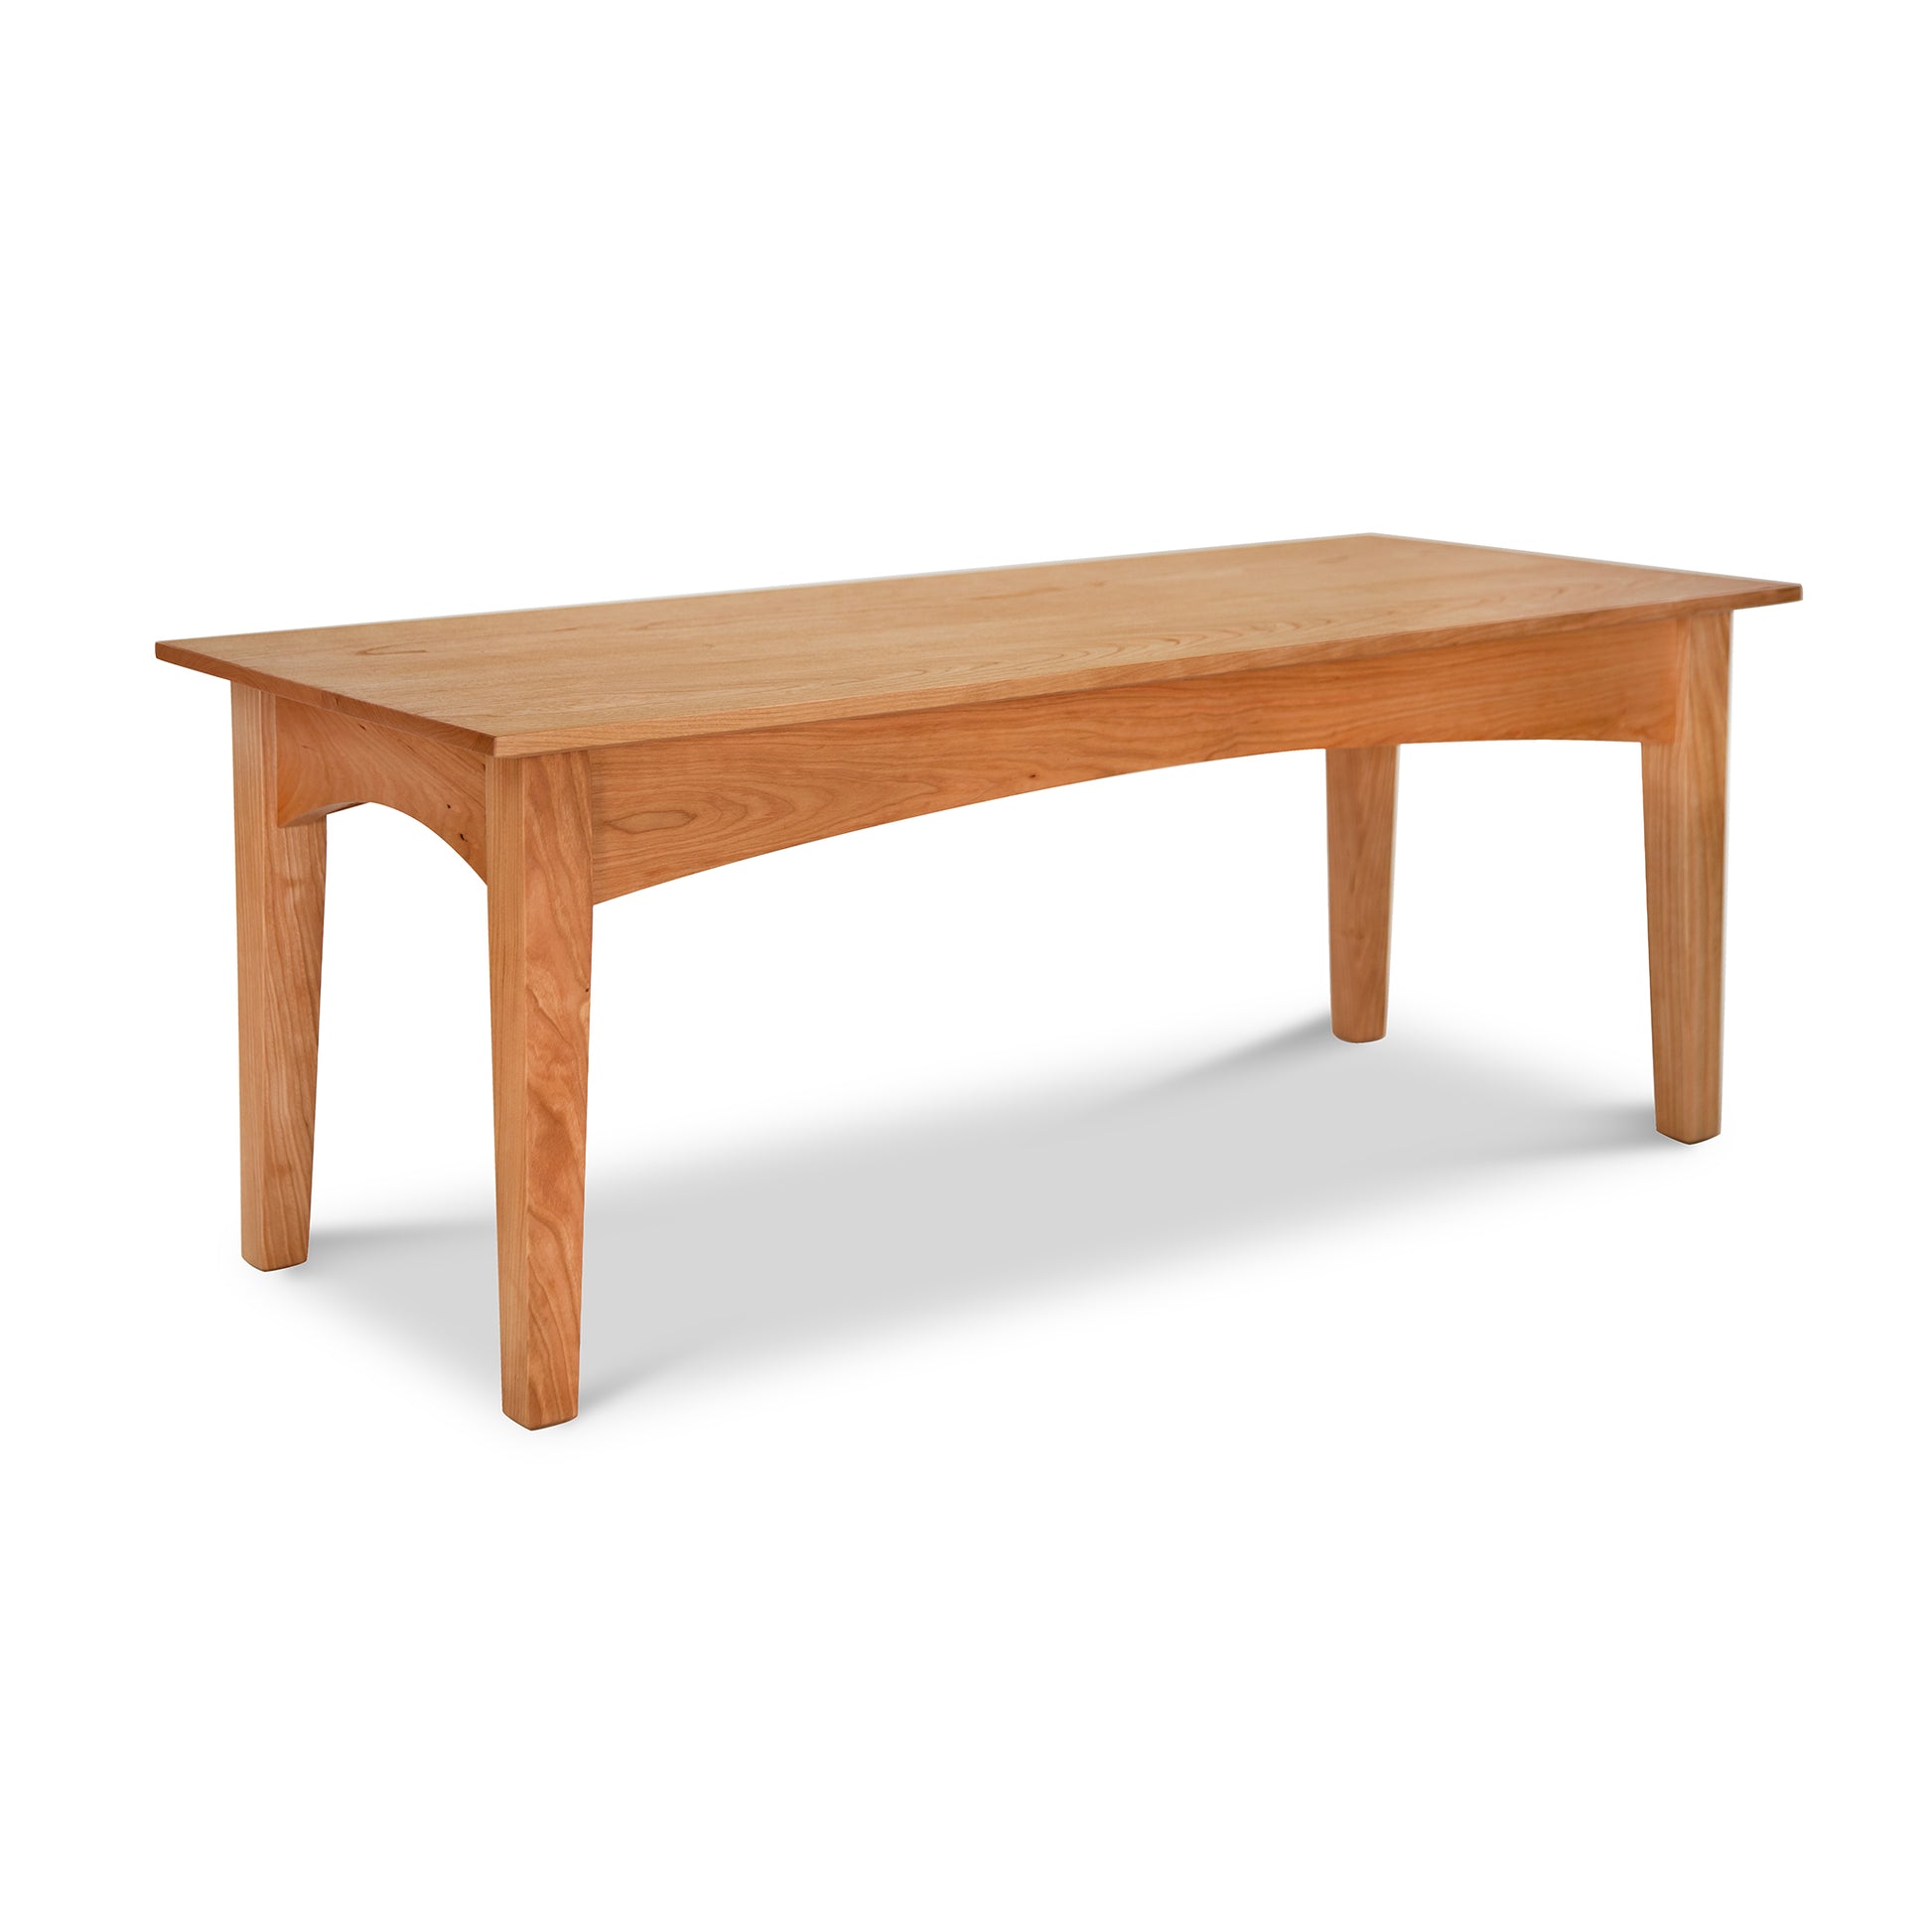 A simple American Shaker Coffee Table from Maple Corner Woodworks with a rectangular top and four sturdy legs, isolated on a white background.